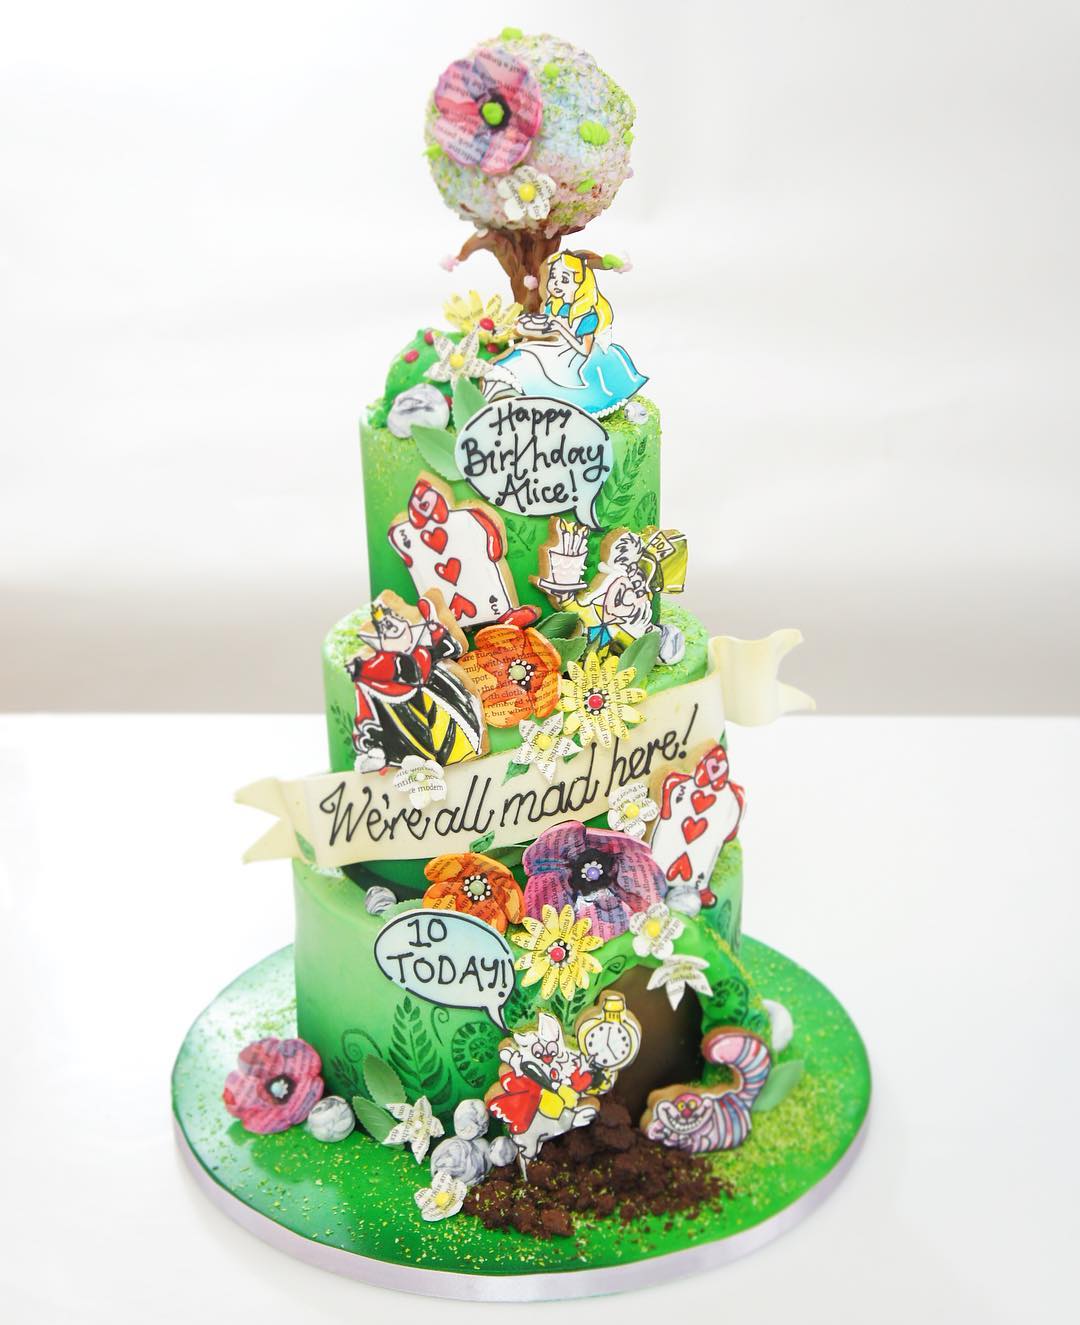 10 Mad Hatter Cake Ideas From Alice In Wonderland · The Inspiration Edit